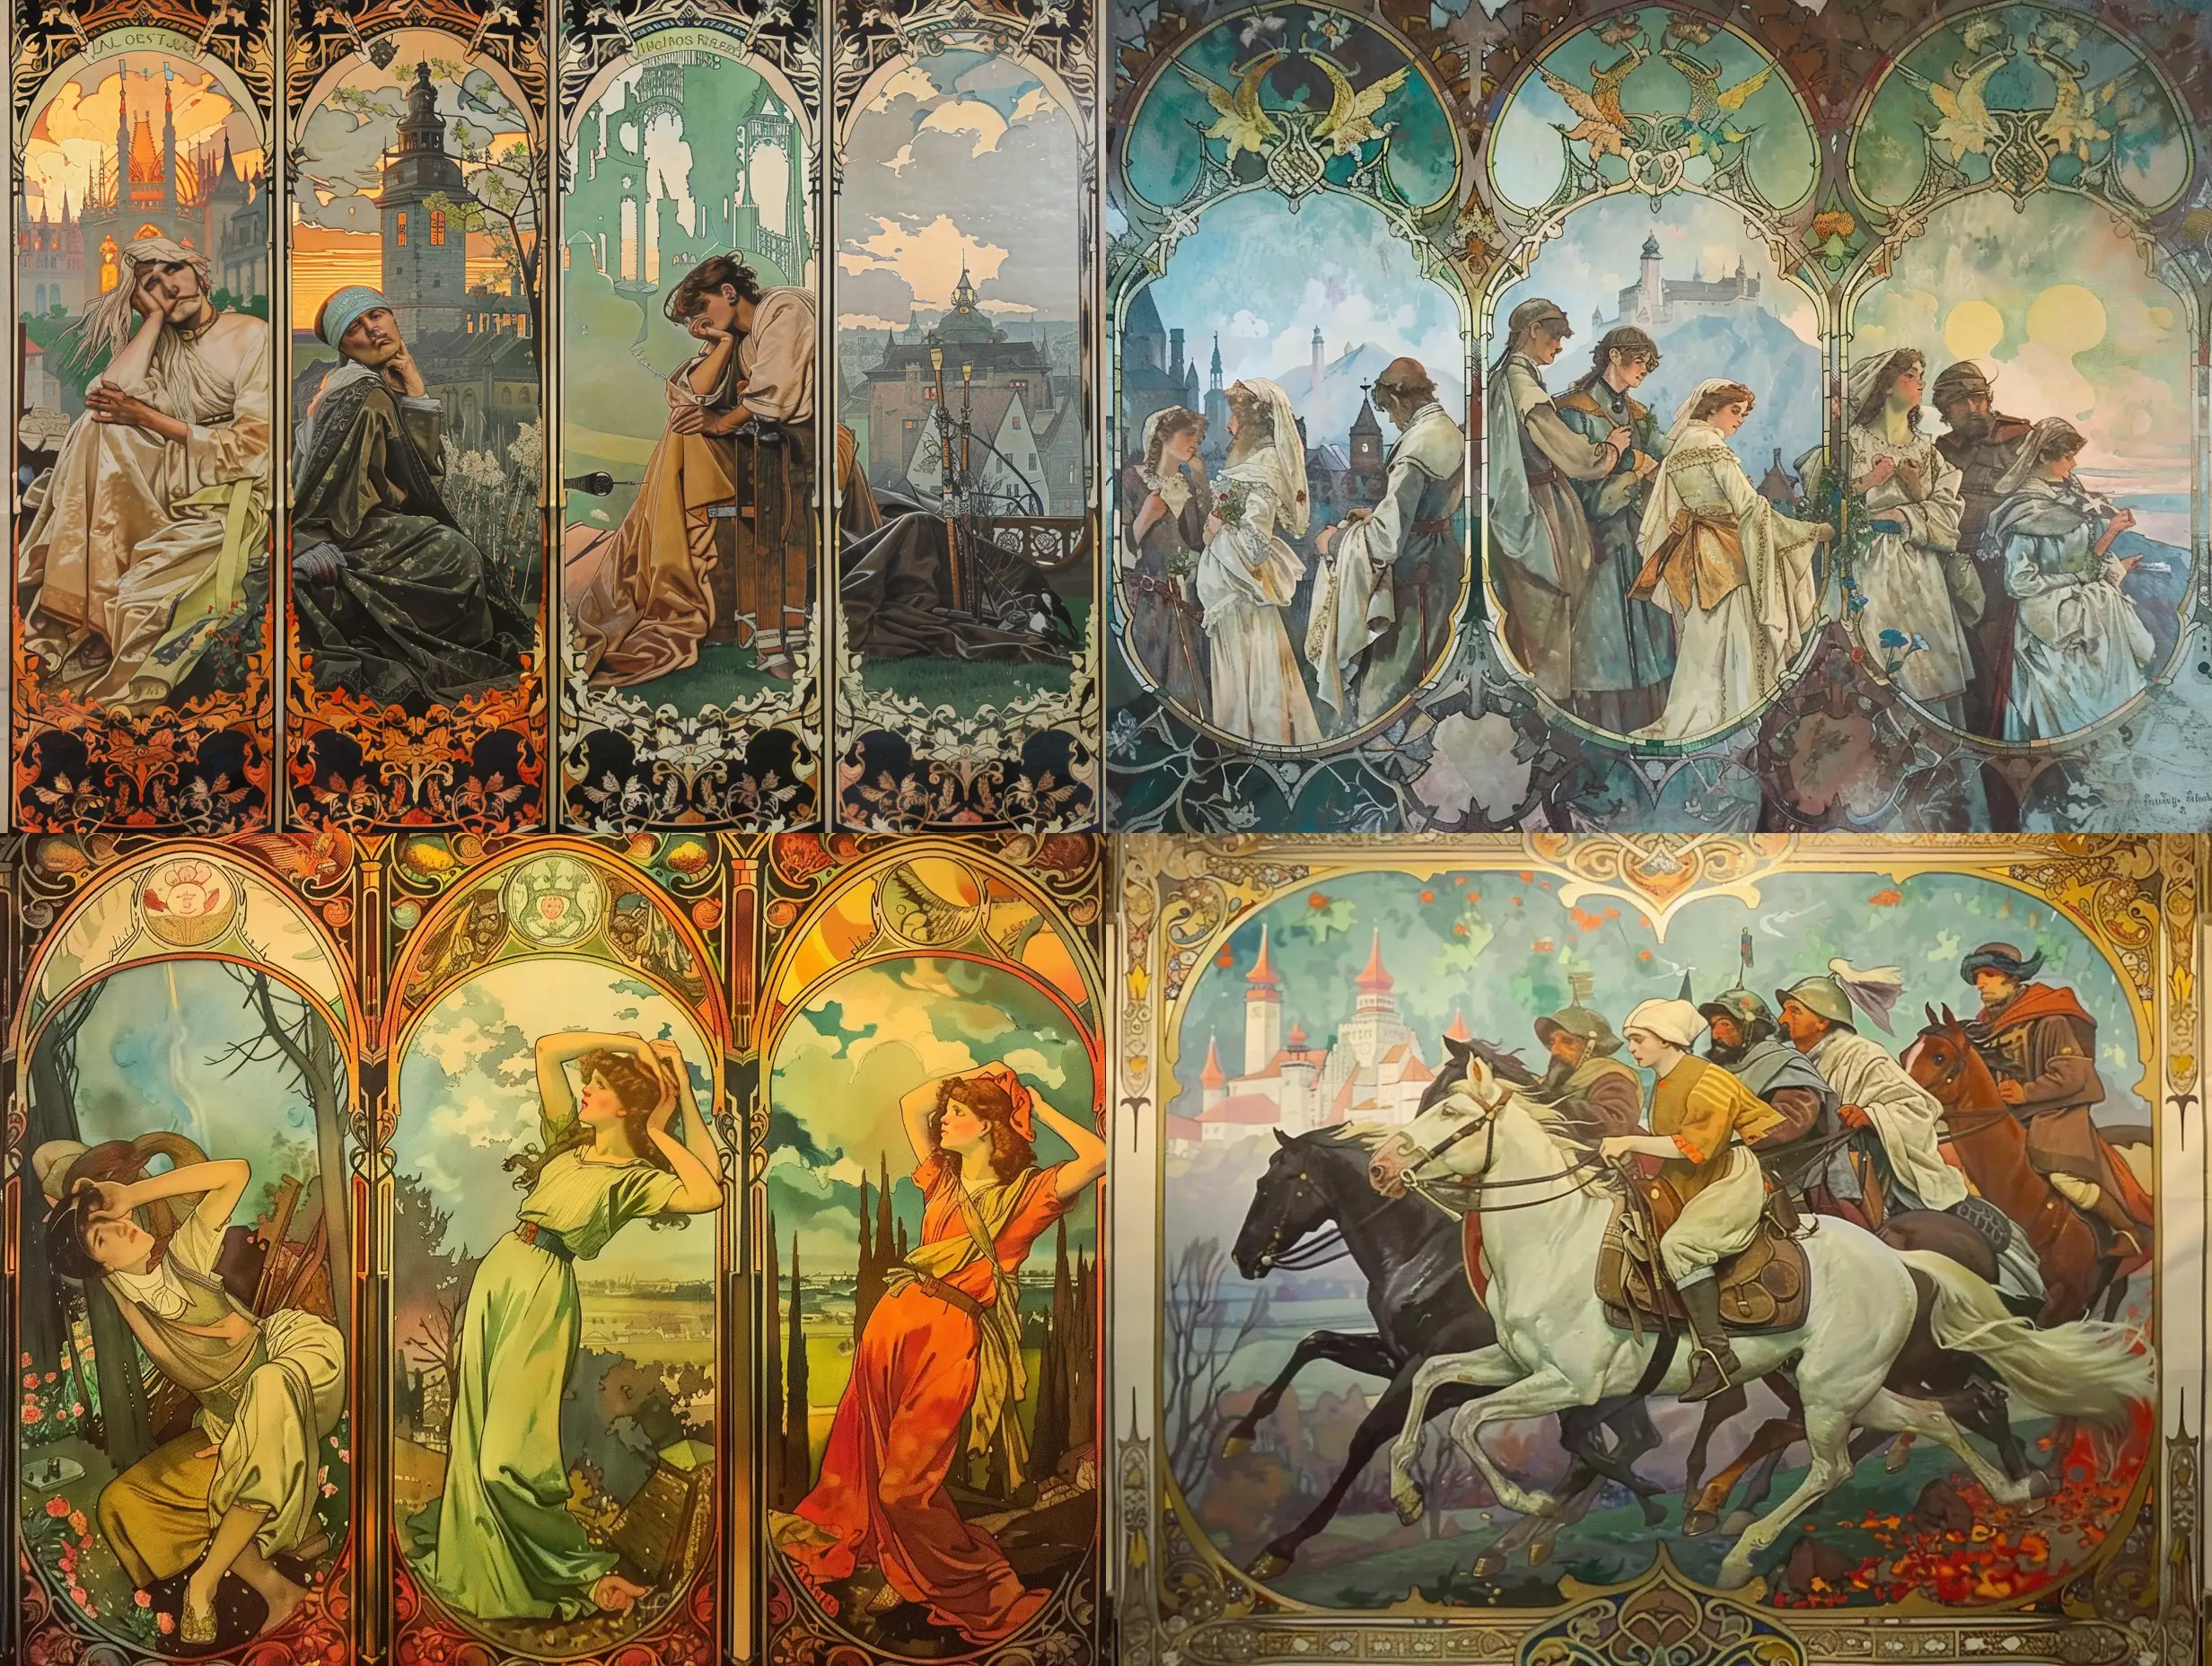 Make painting in style of Slavs Epic series of paintings of Czech painter Alfons Mucha. Picture what the Munich Agreement and the occupation of 15 March 1939 meant for Bohemia and its inhabitants.